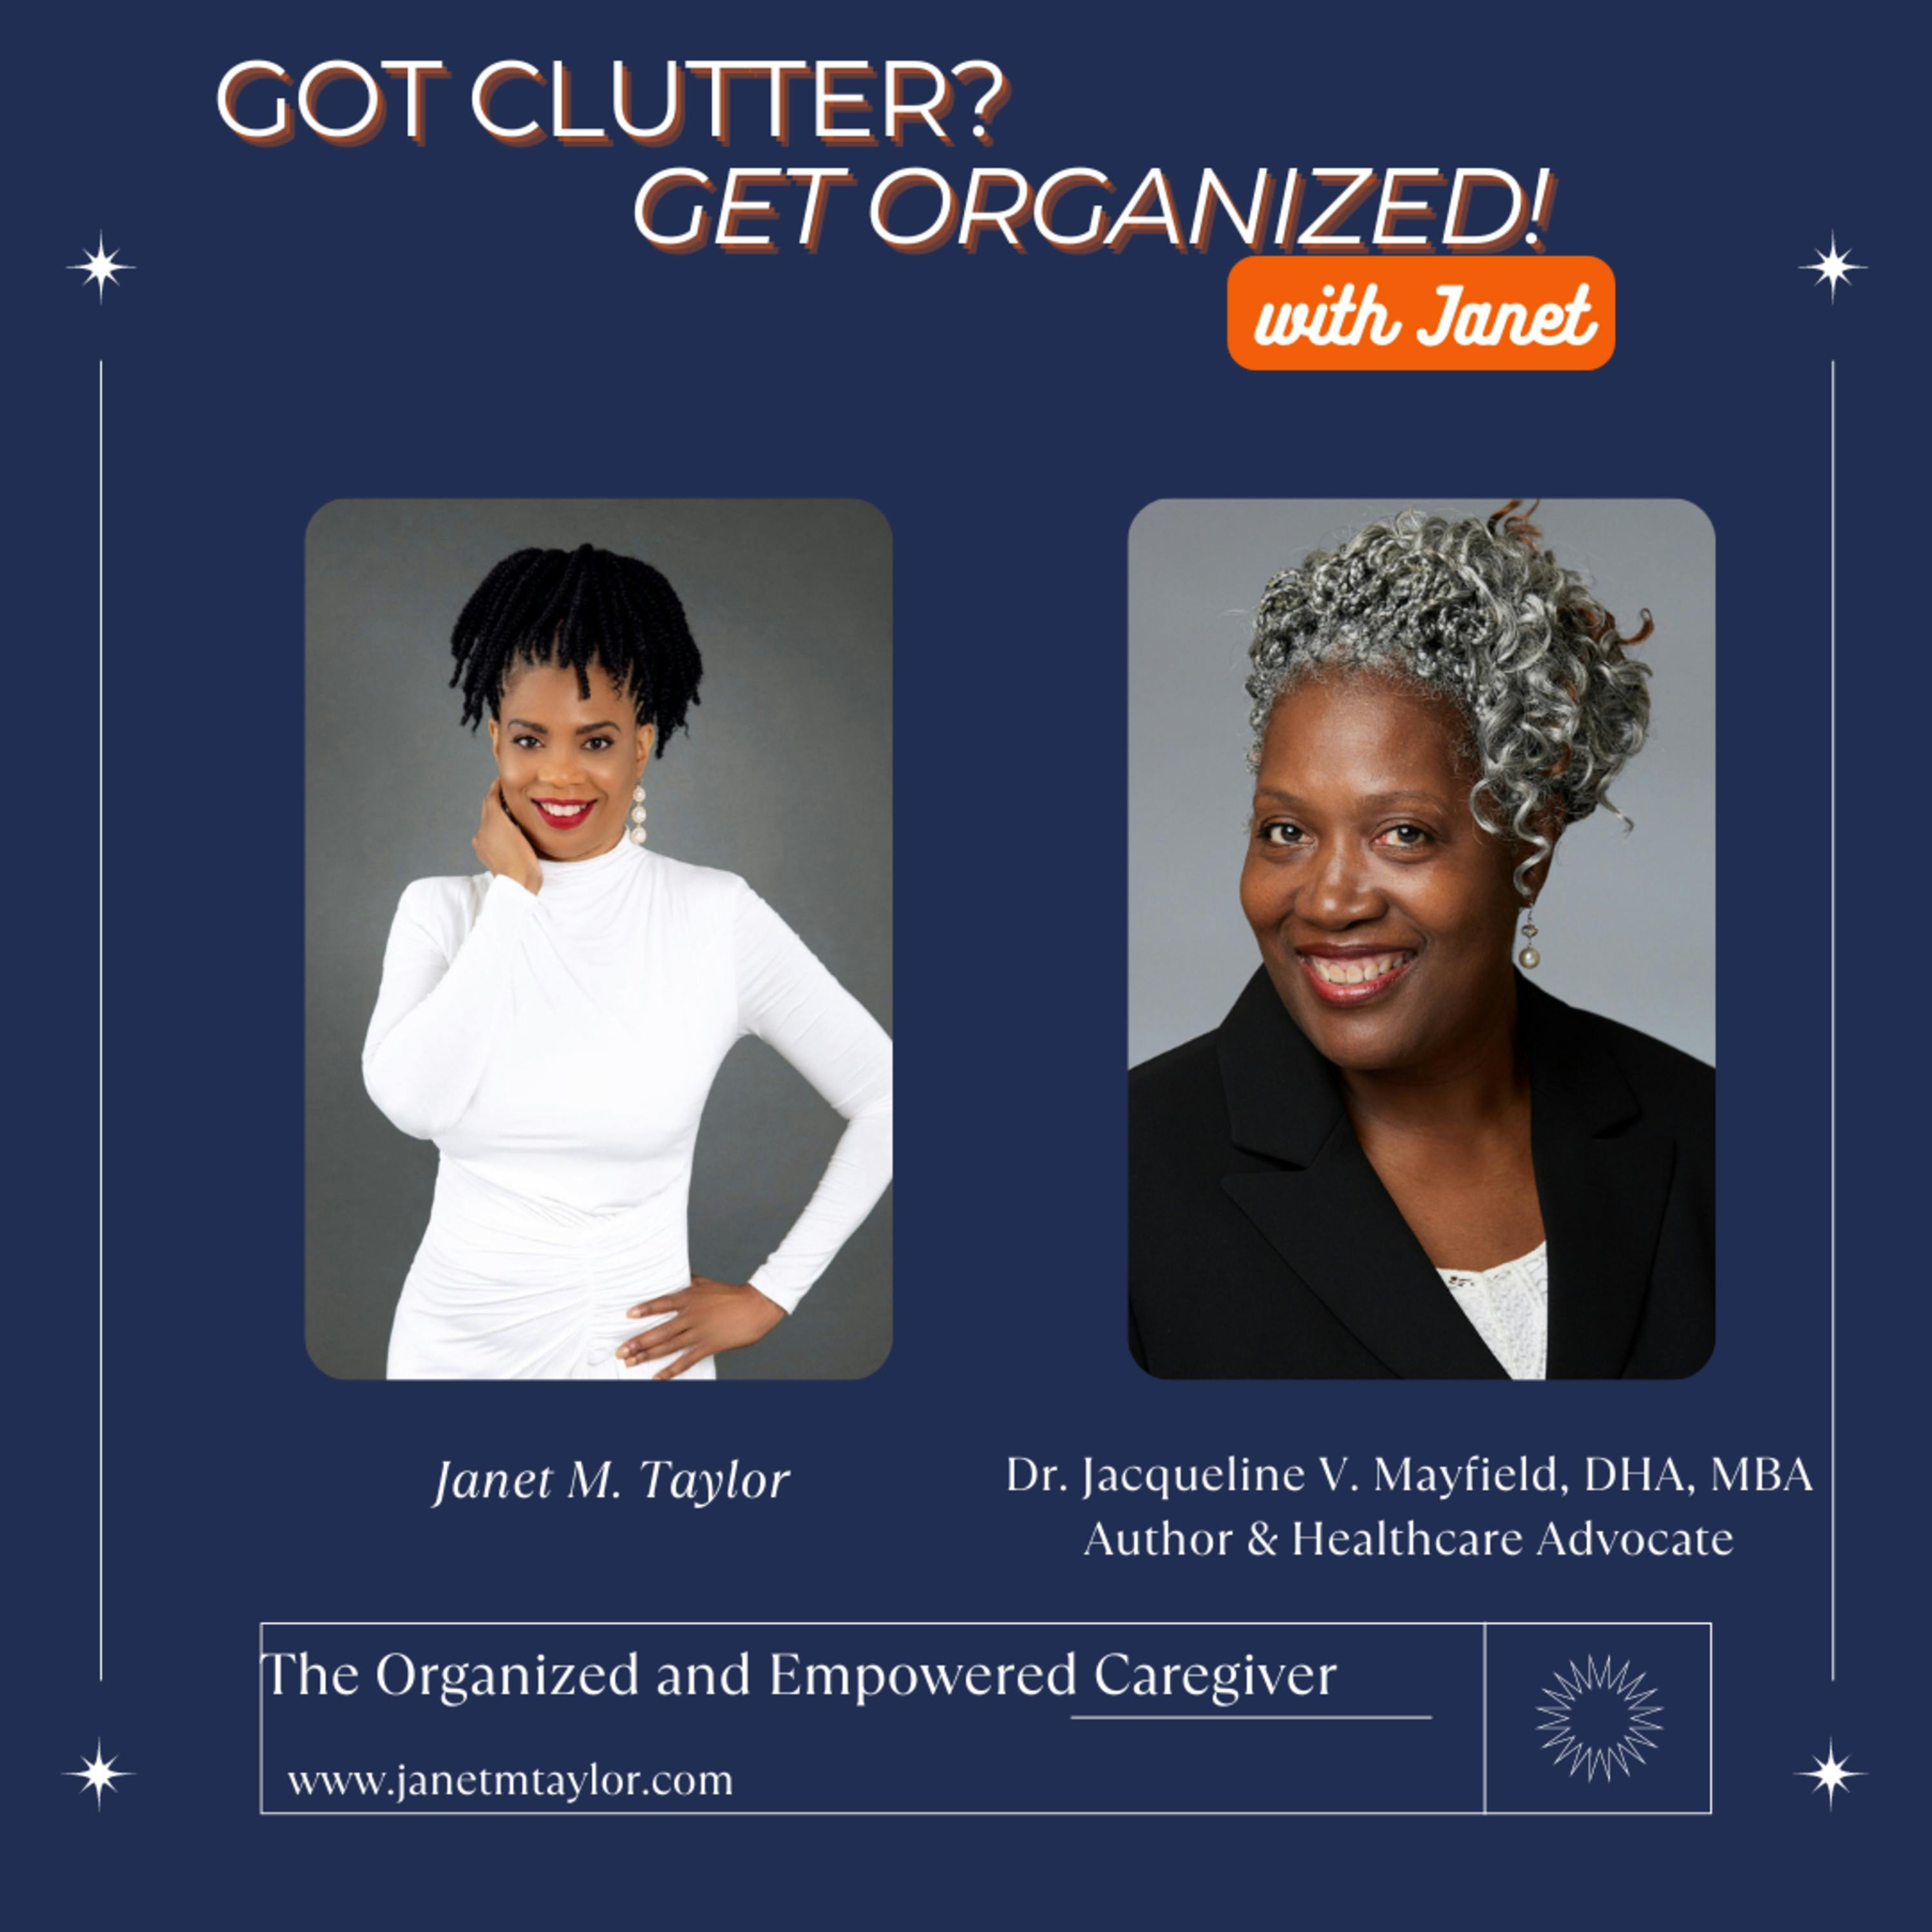 The Organized and Empowered Caregiver with Dr. Jaqueline V. Mayfield, DHA, MBA